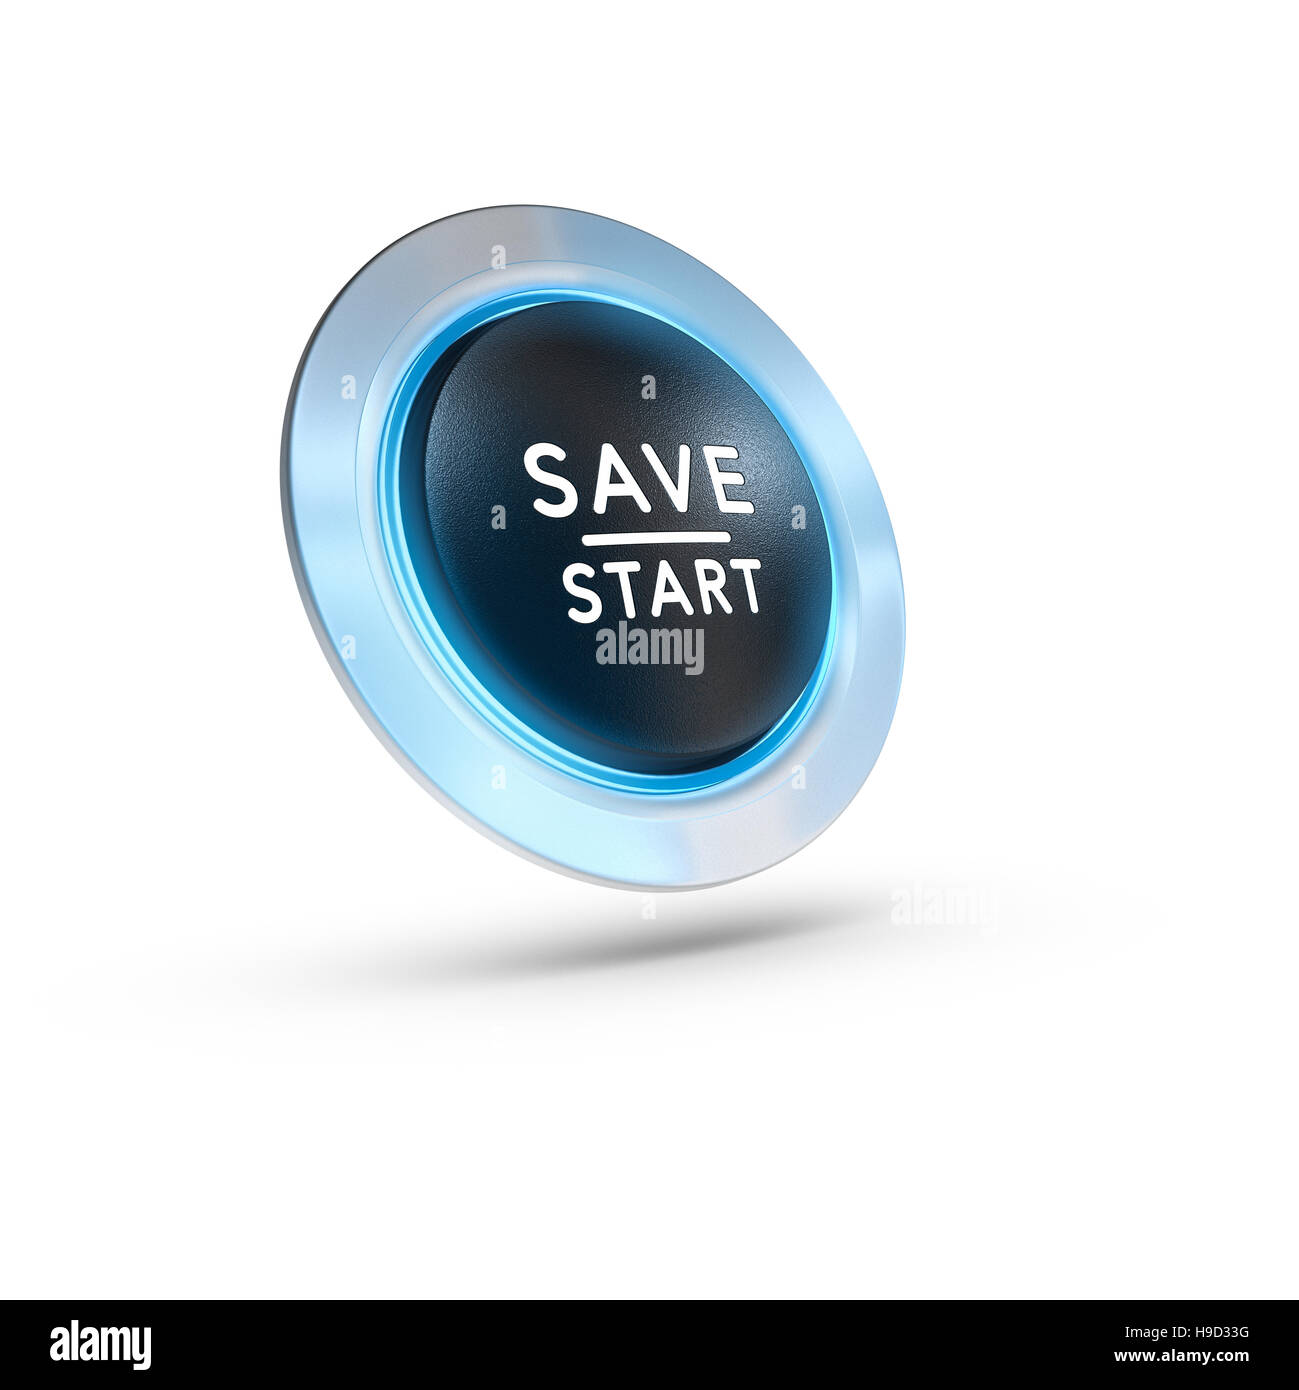 3D illustration of a push button with the text save start over white background. Square image Stock Photo